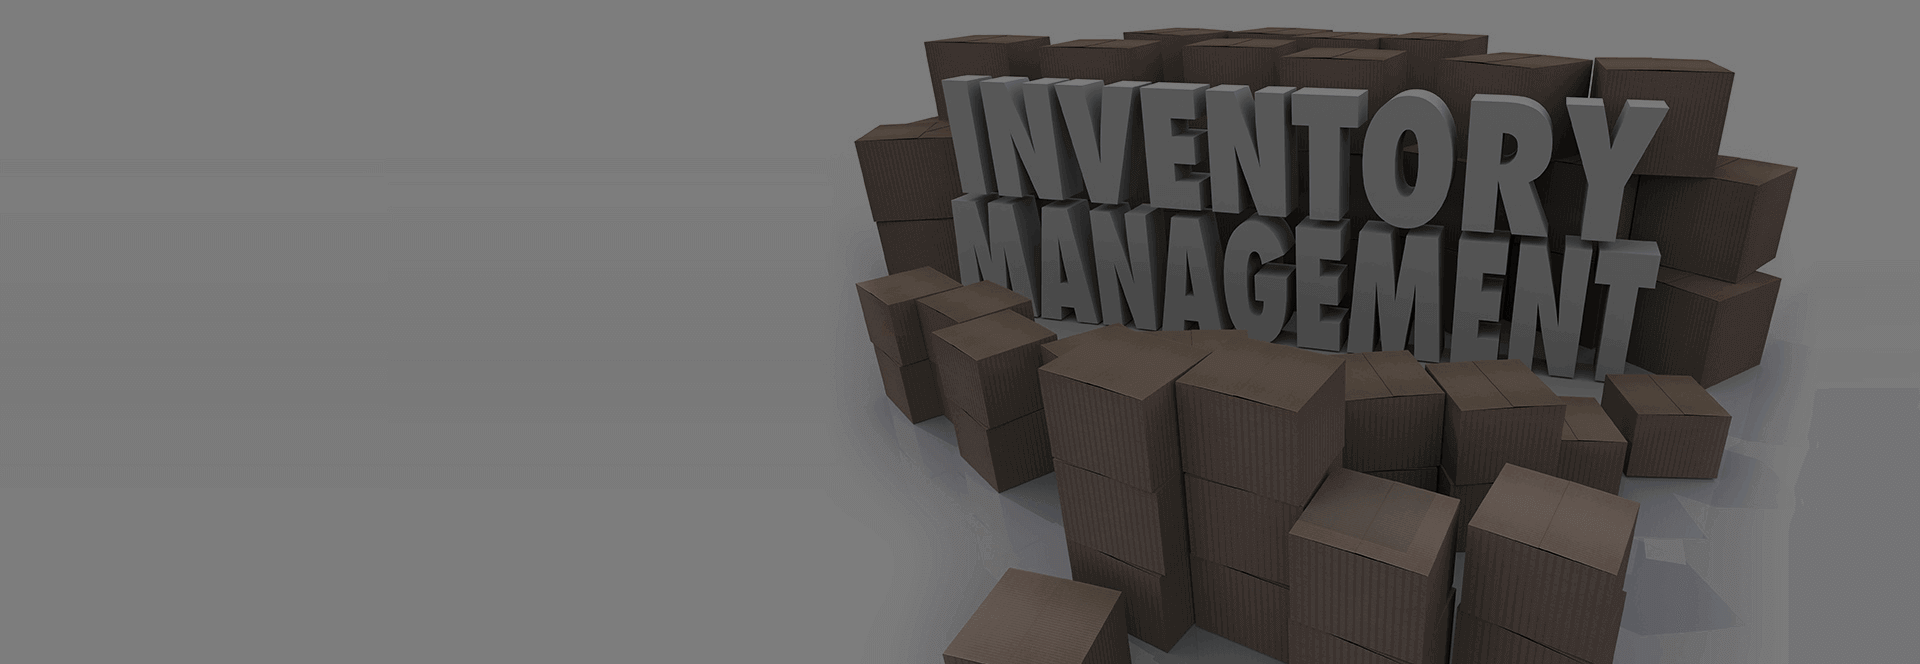 Inventory Management Solutions Banner